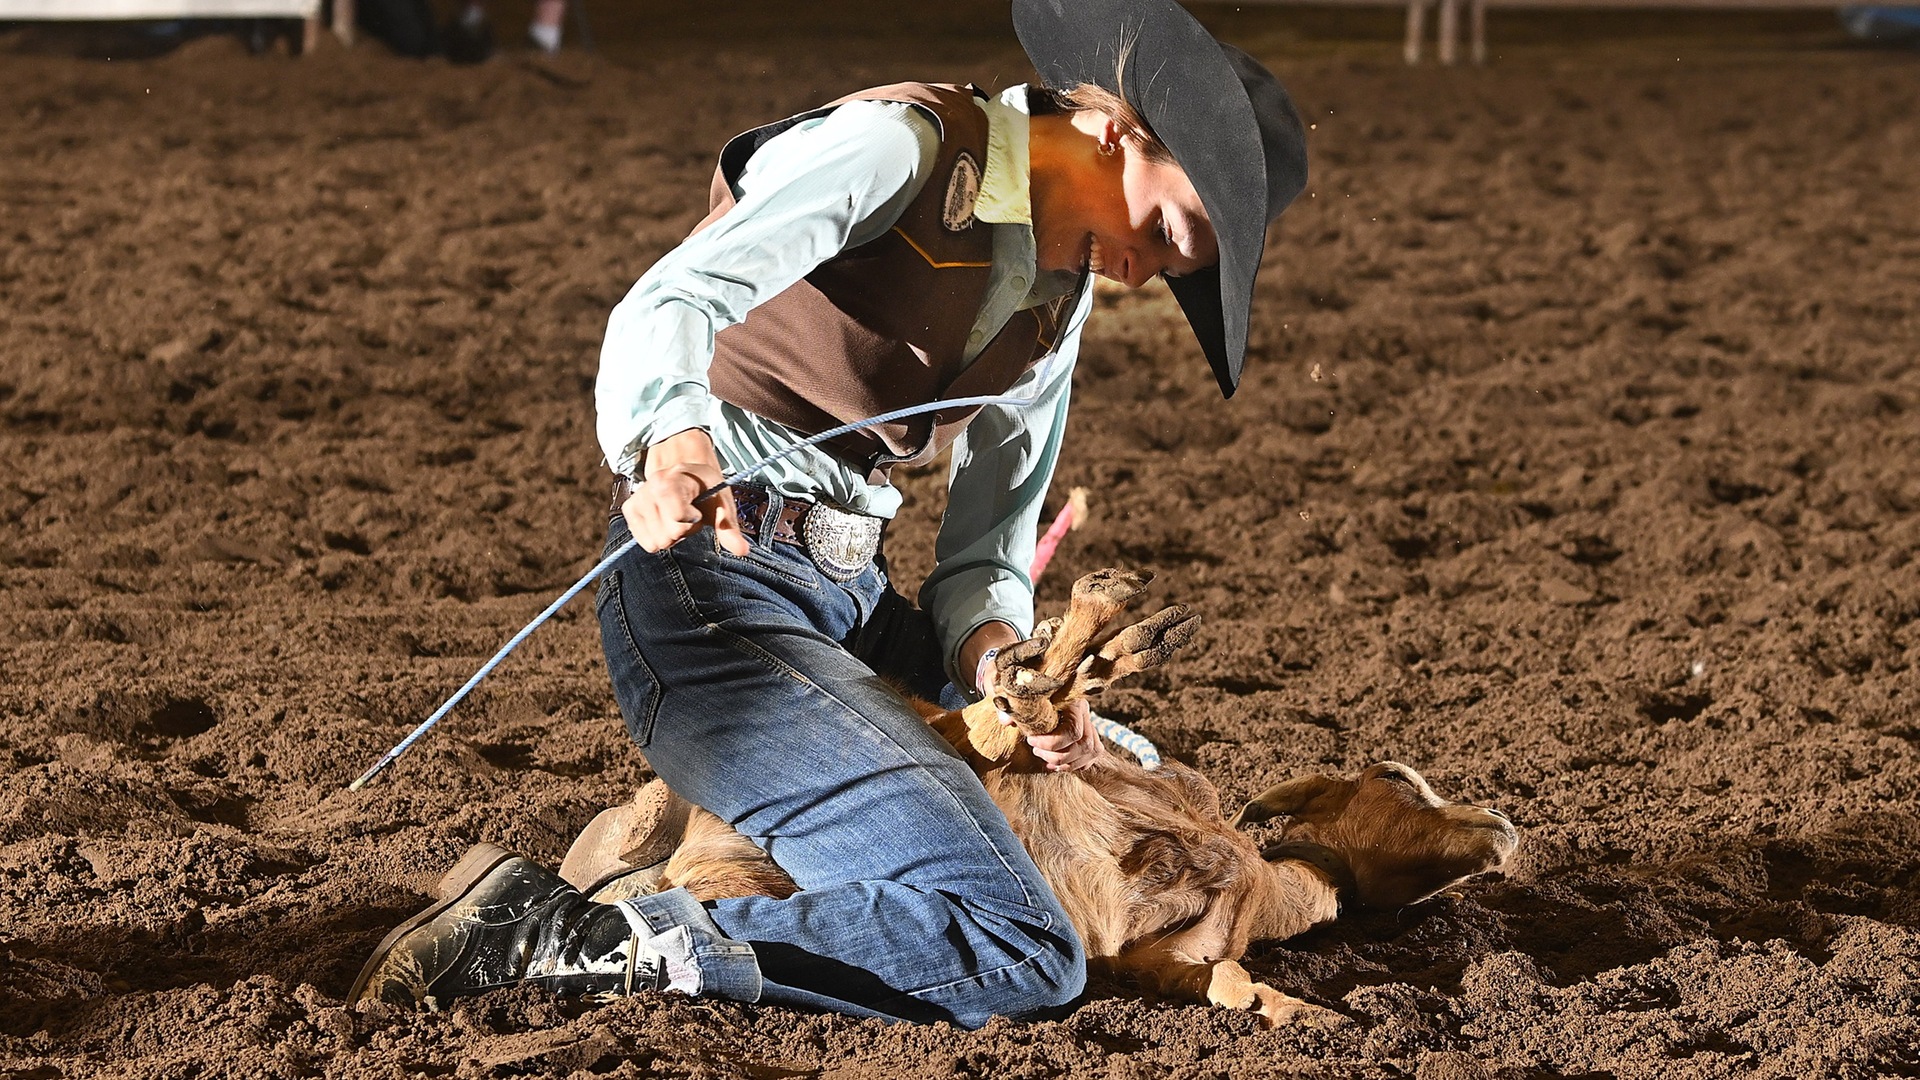 Garden City hosts 57th annual College Rodeo Thumbnail